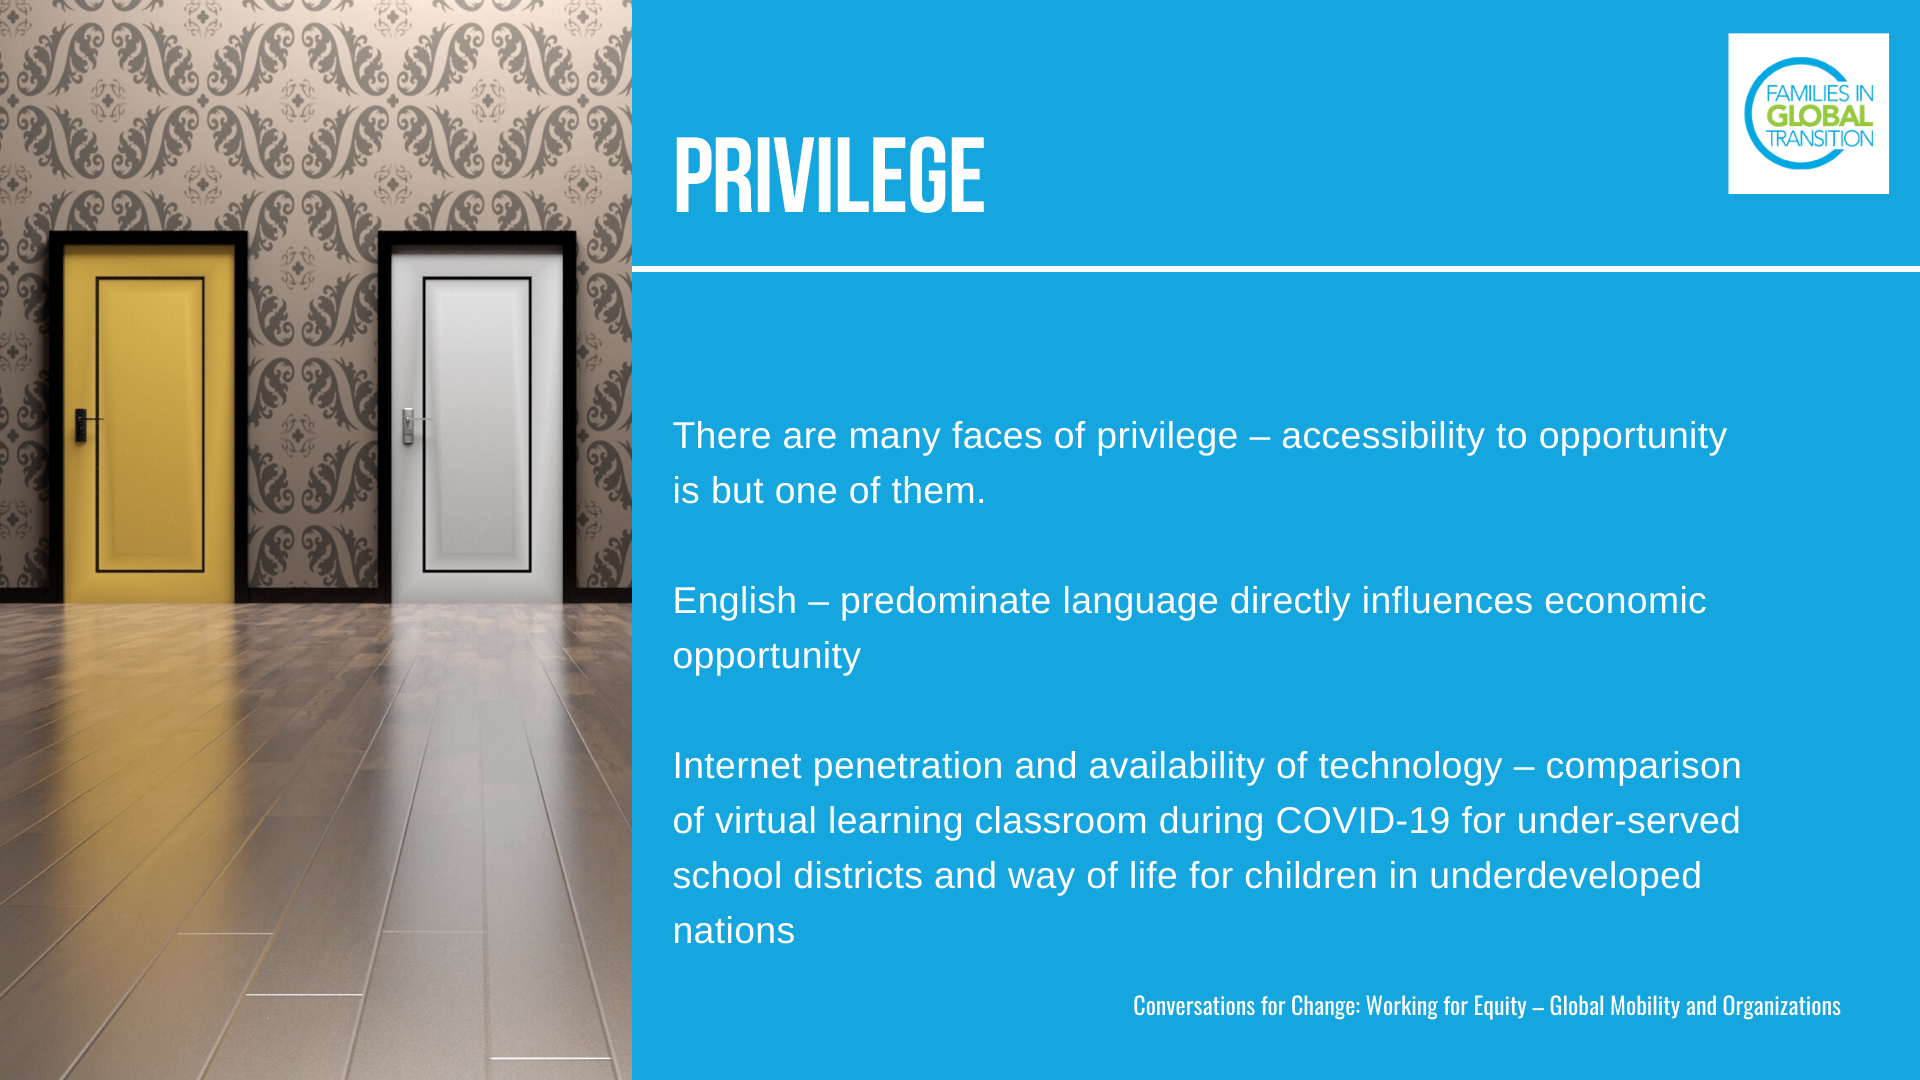 Privilege: There are many faces of privilege – accessibility to opportunity is but one of them. English – predominate language directly influences economic opportunity Internet penetration and availability of technology – comparison of virtual learning classroom during COVID-19 for under-served school districts and way of life for children in underdeveloped nations